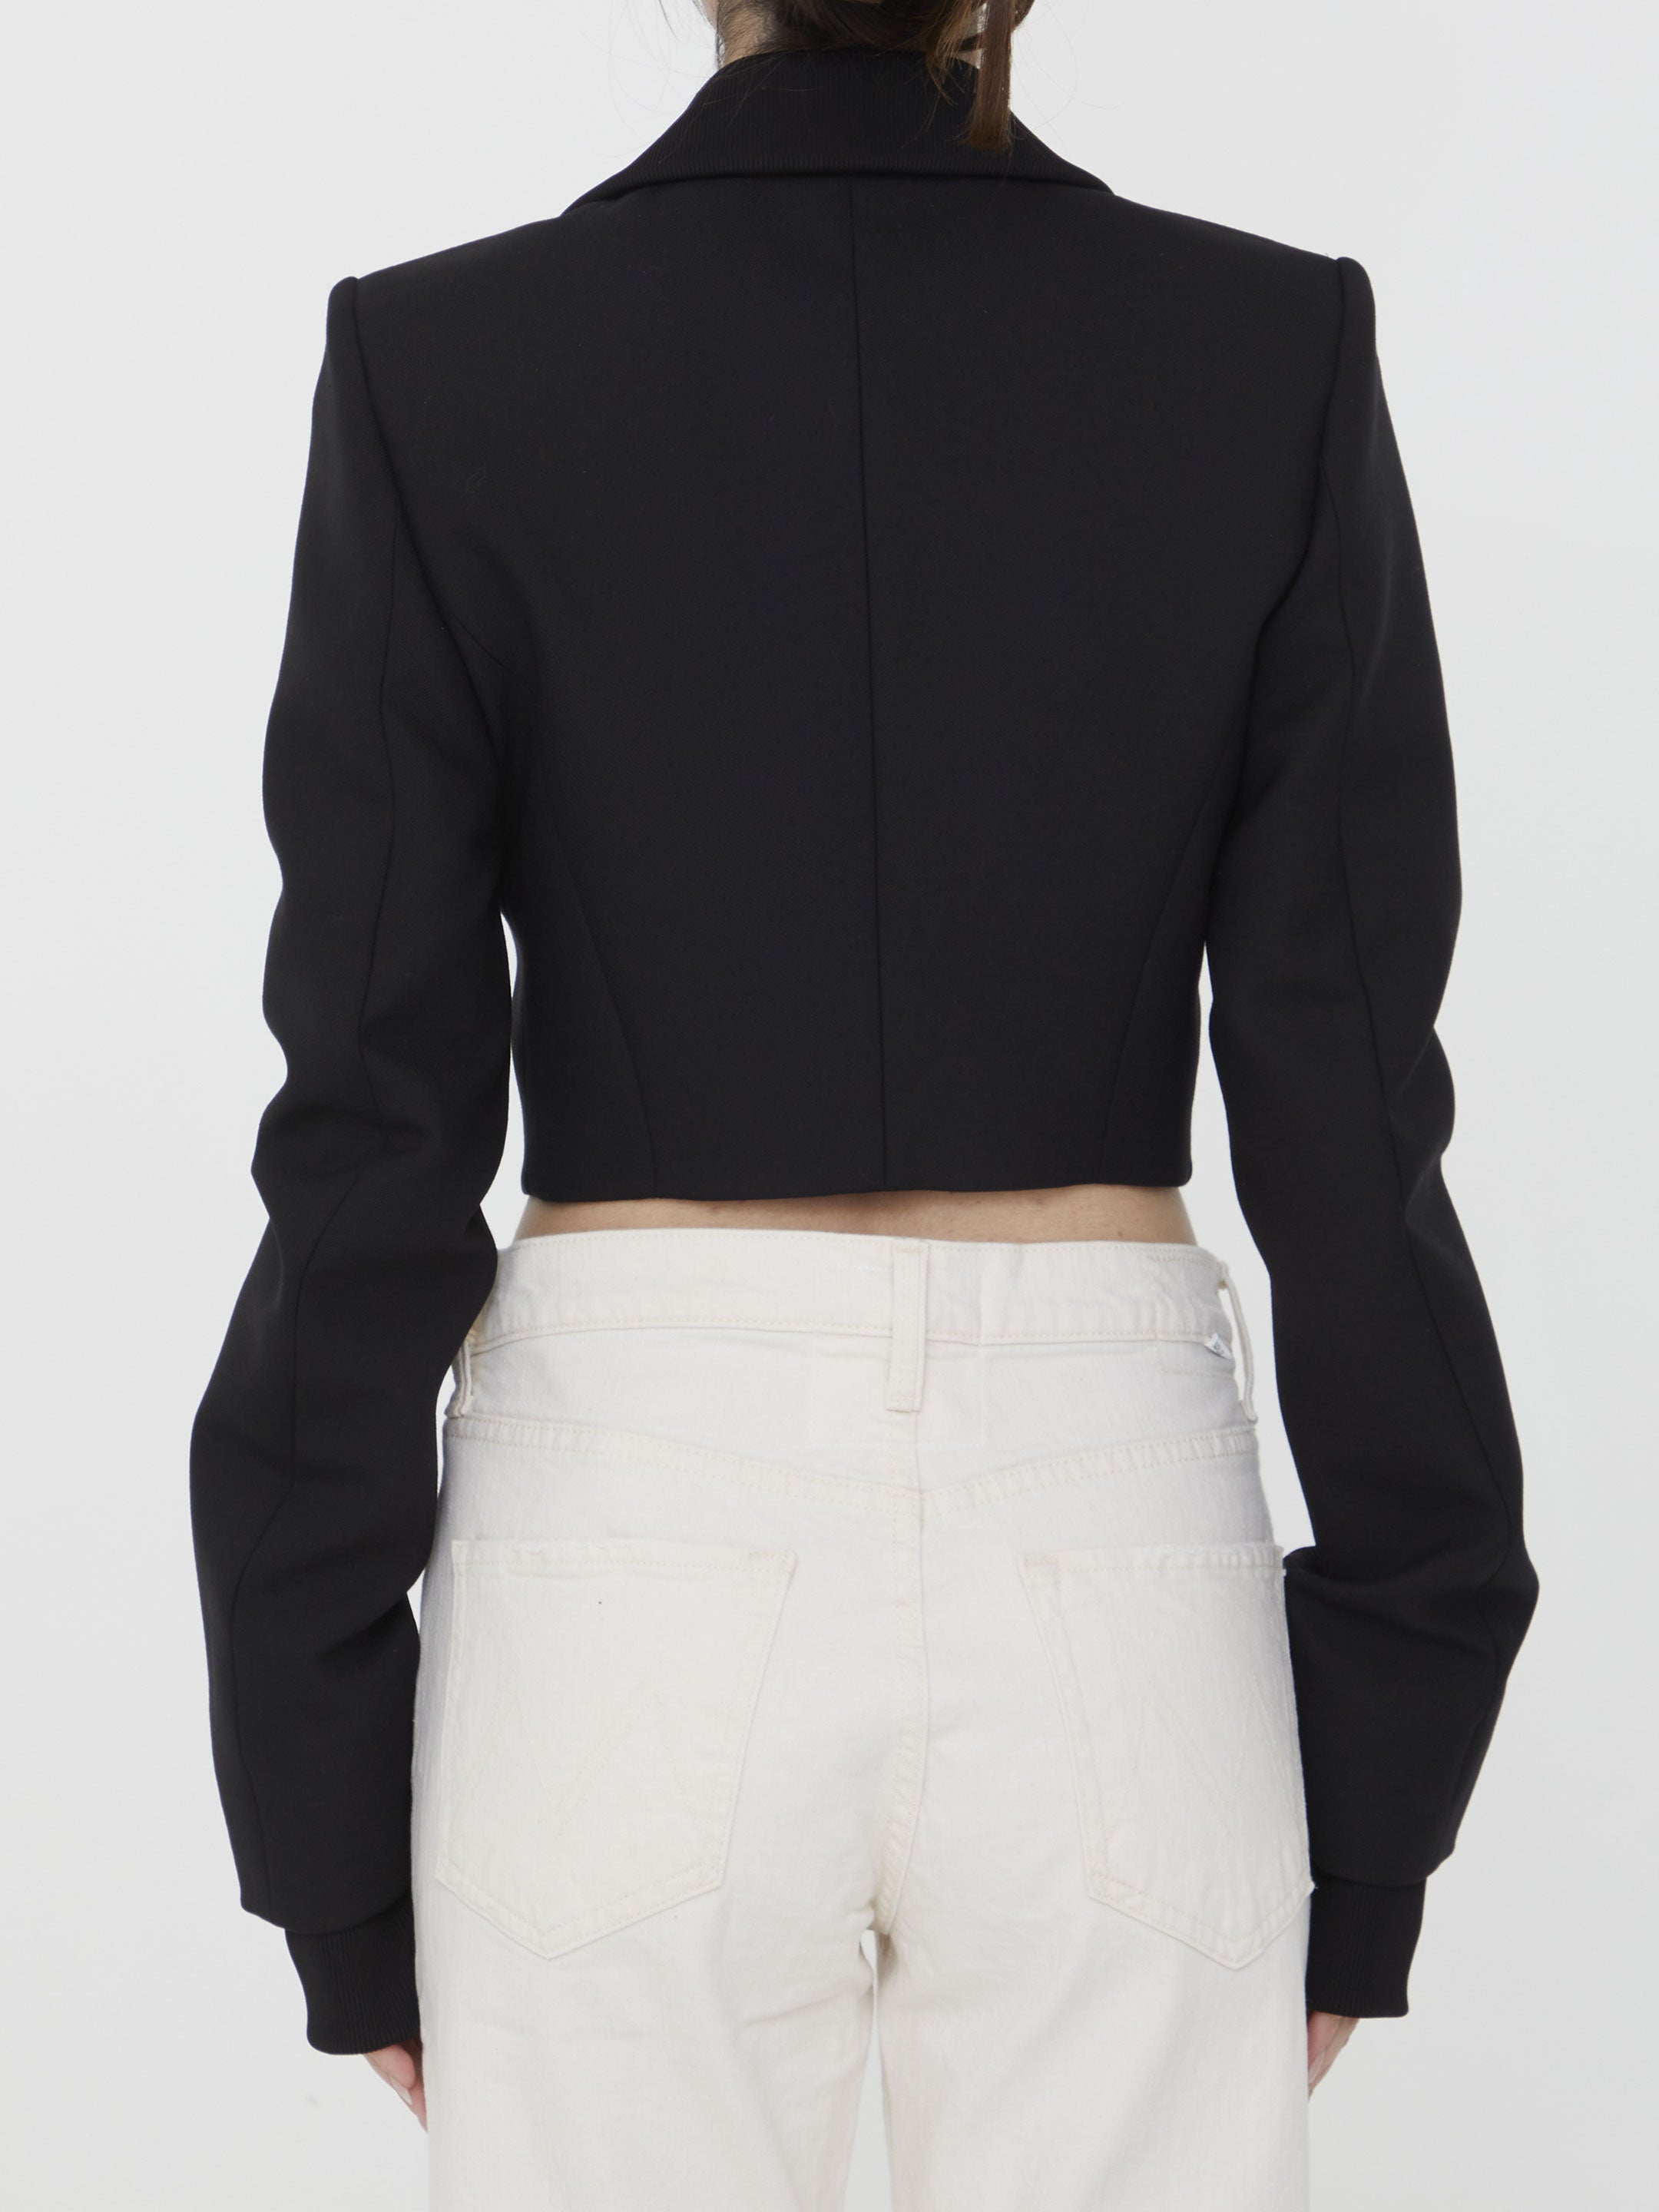 OFF-WHITE-OUTLET-SALE-Asymmetrical-cropped-jacket-Jacken-Mantel-ARCHIVE-COLLECTION-4.jpg